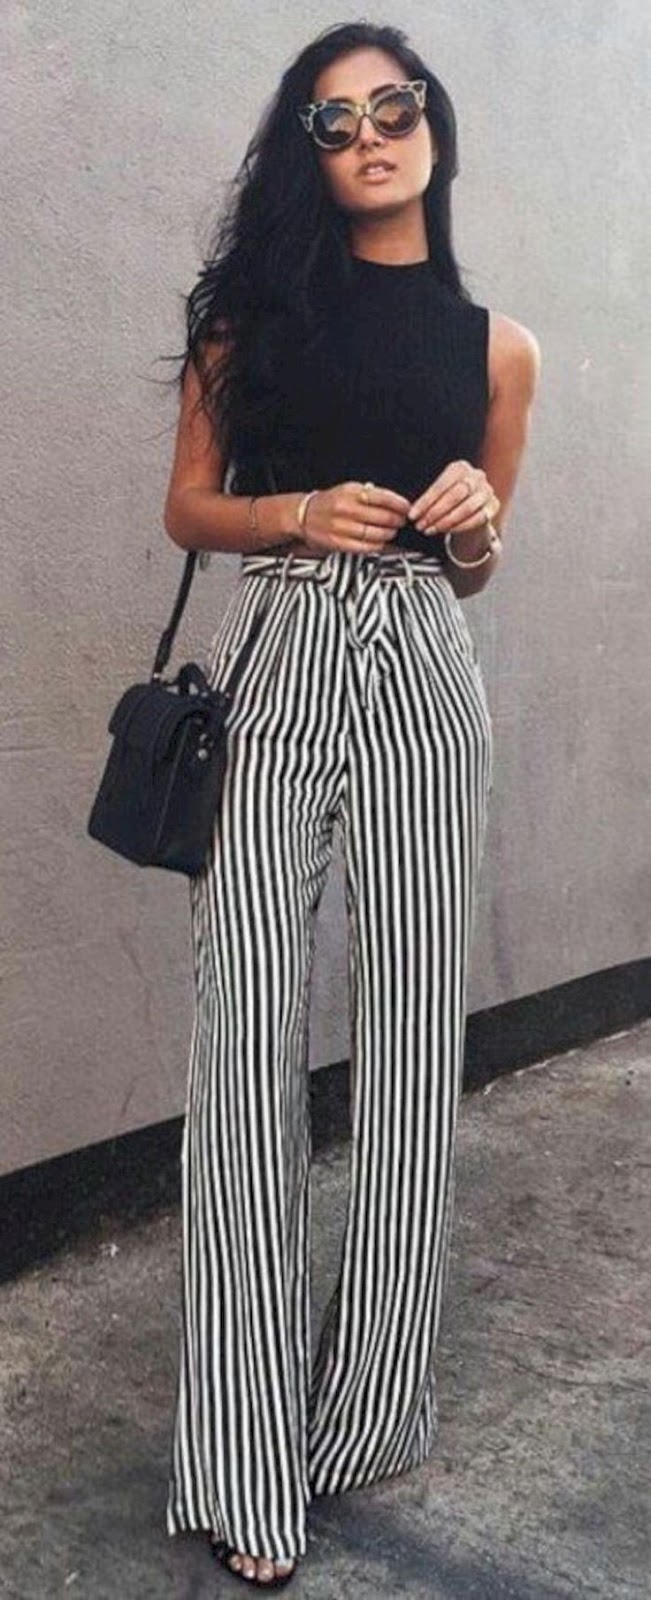 black and white outfit idea / top + wide striped pants + bag